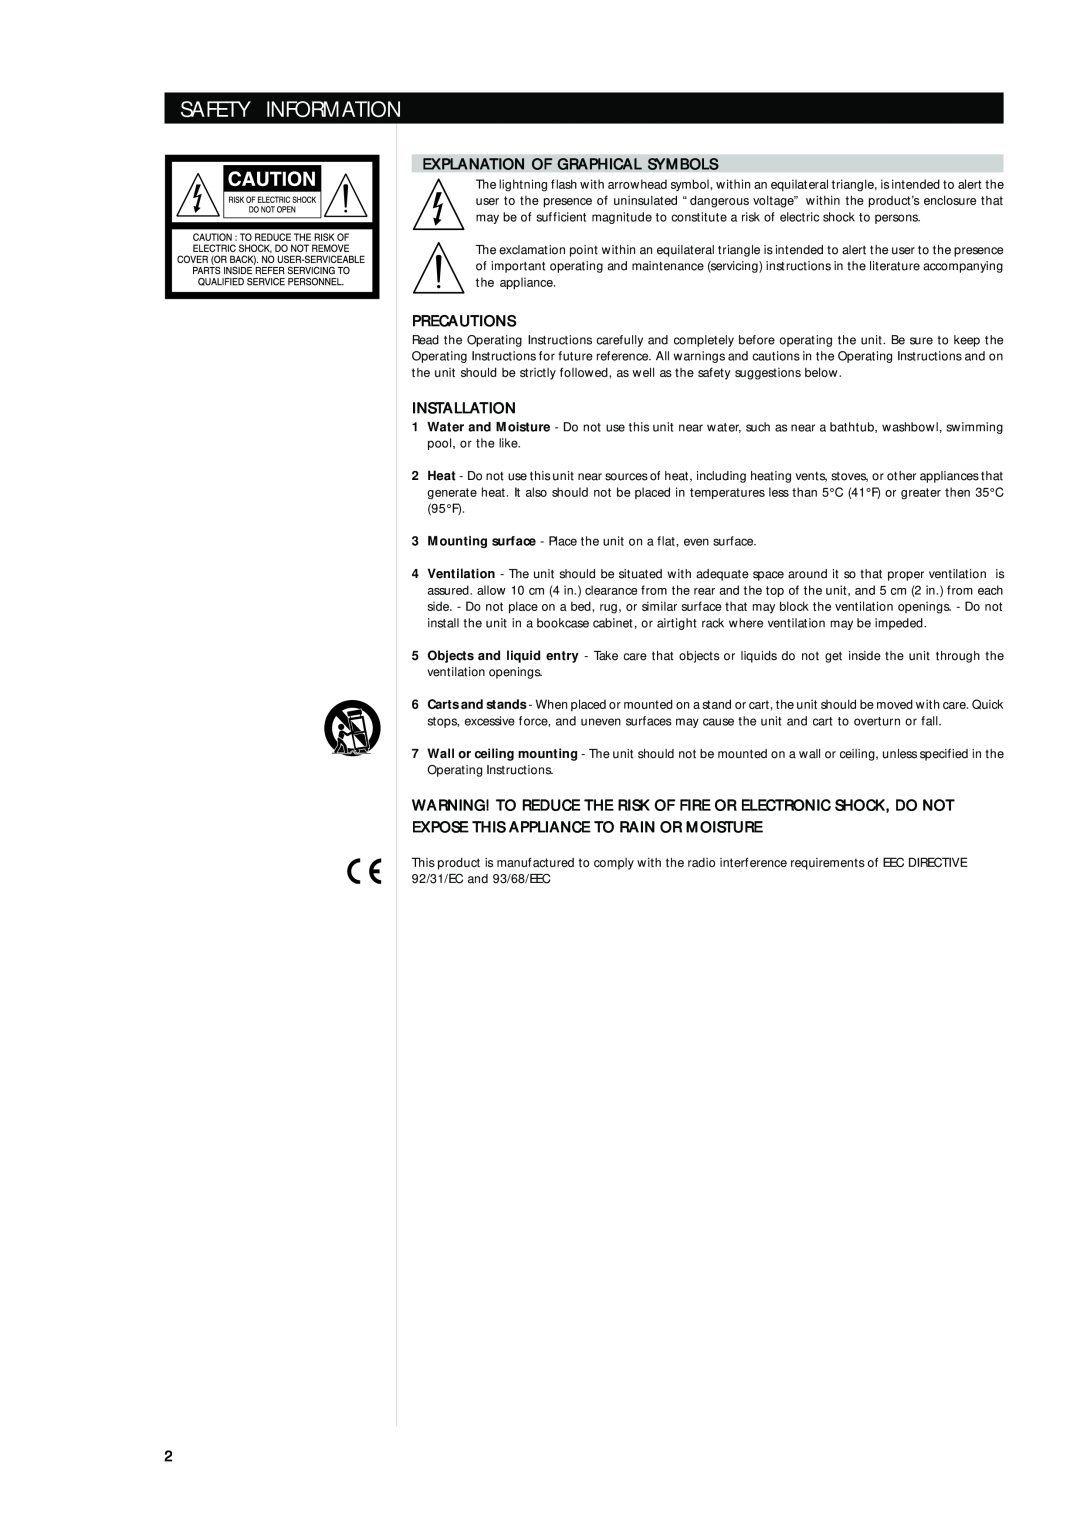 Integra T752 owner manual Safety Information, Explanation Of Graphical Symbols, Precautions, Installation 